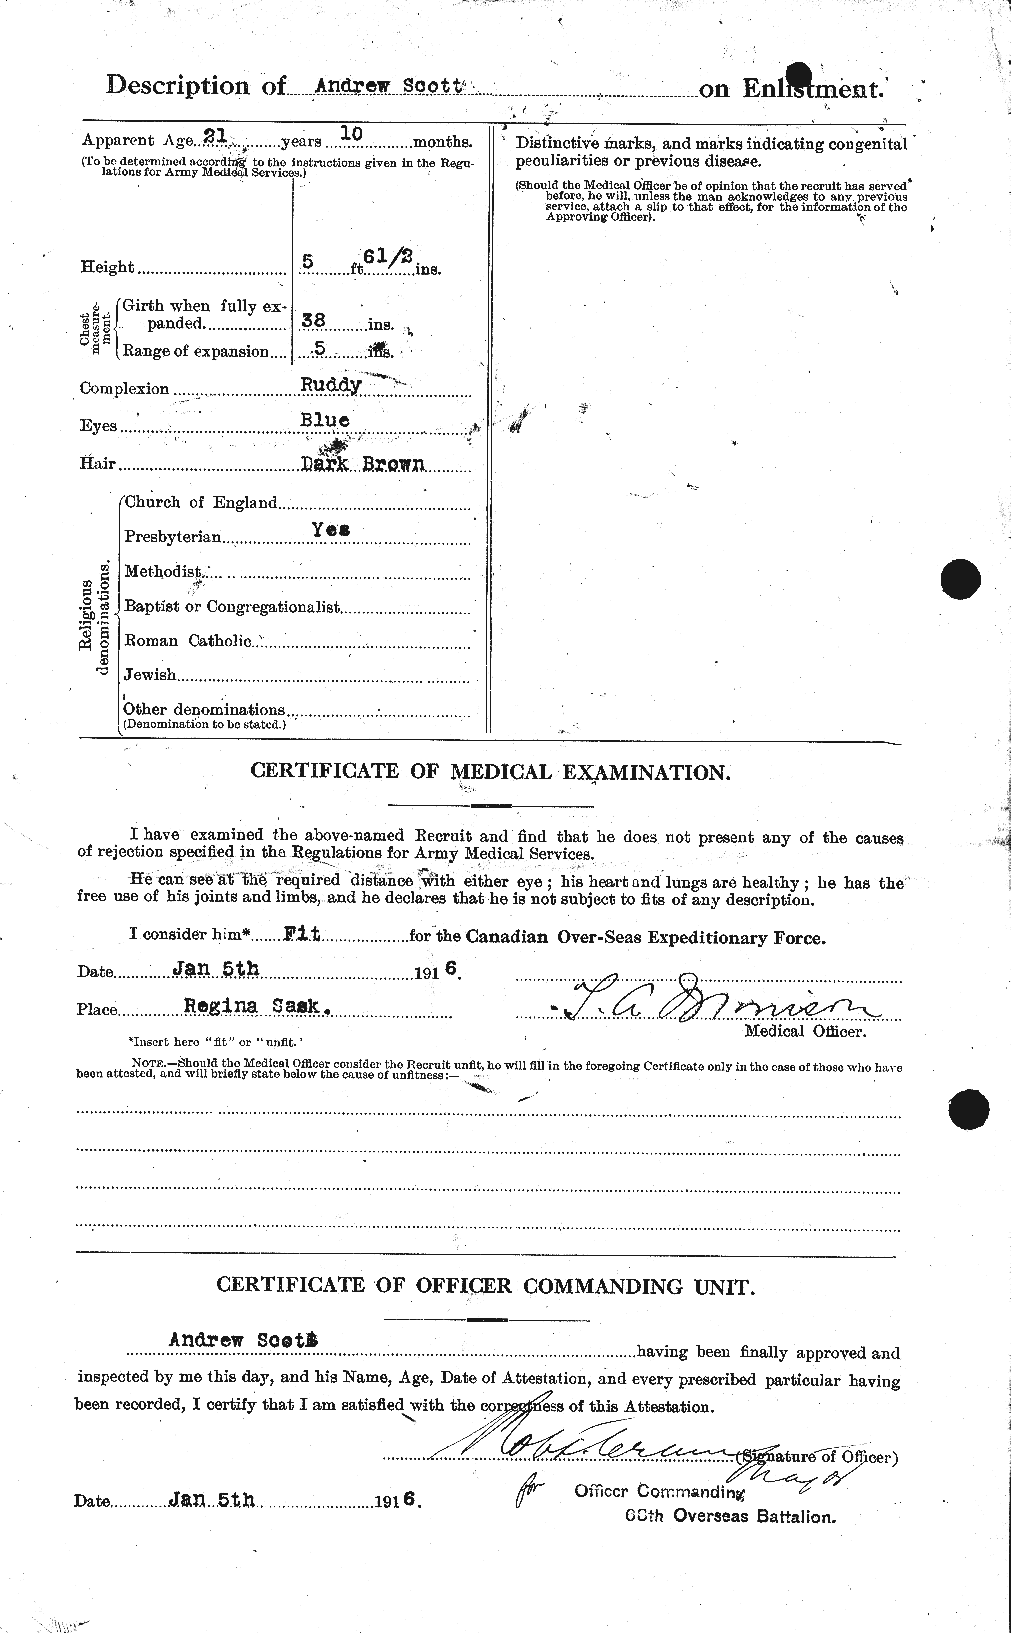 Personnel Records of the First World War - CEF 086453b